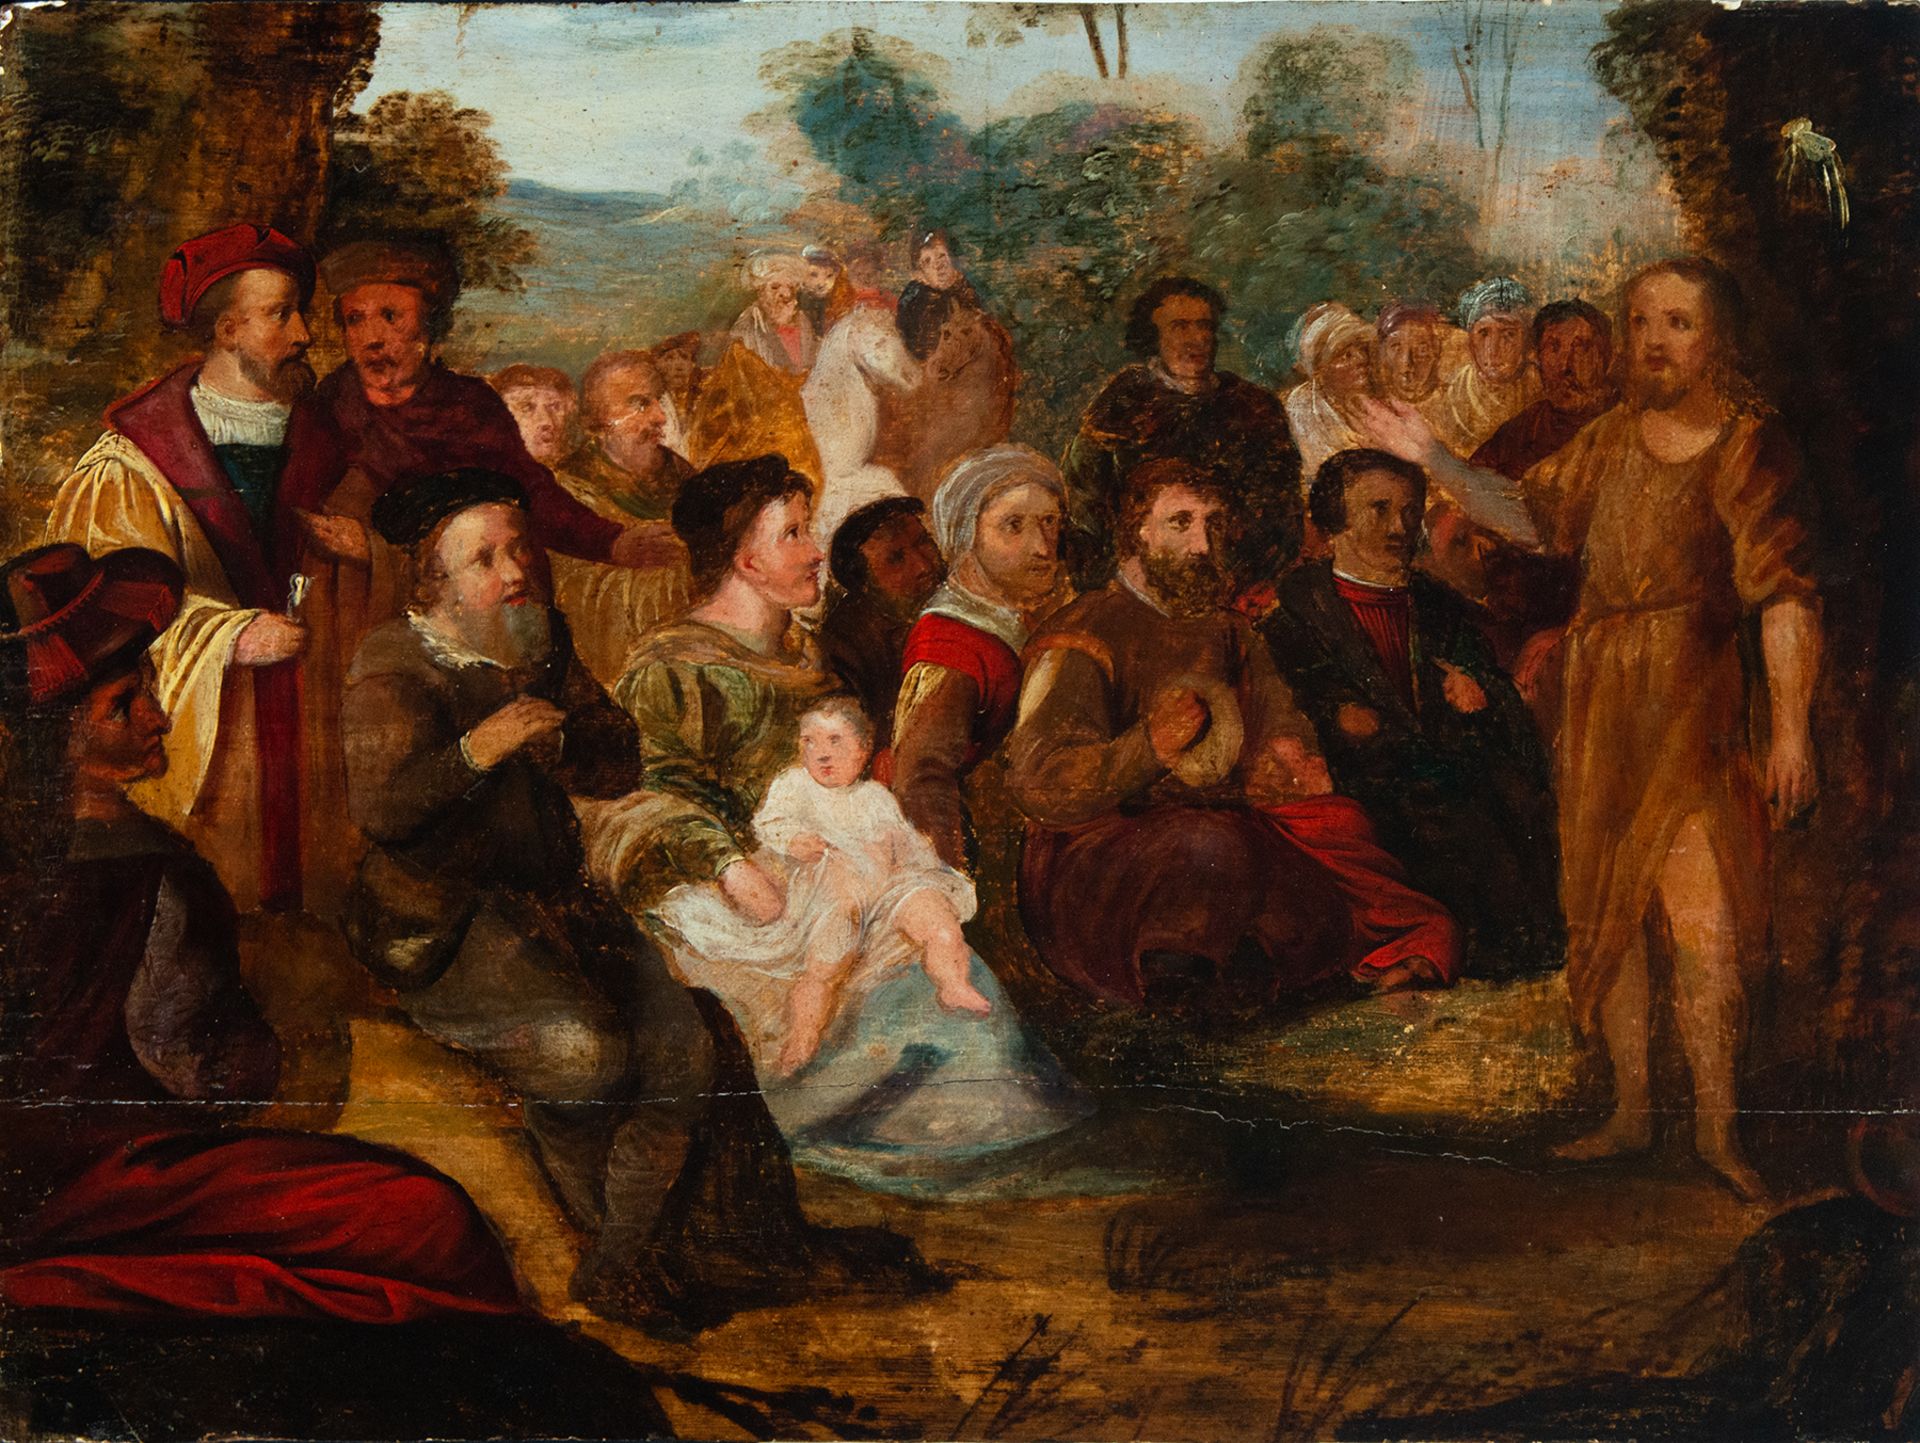 Christ Preaching to the Shepherds, Flemish School of the early 17th century